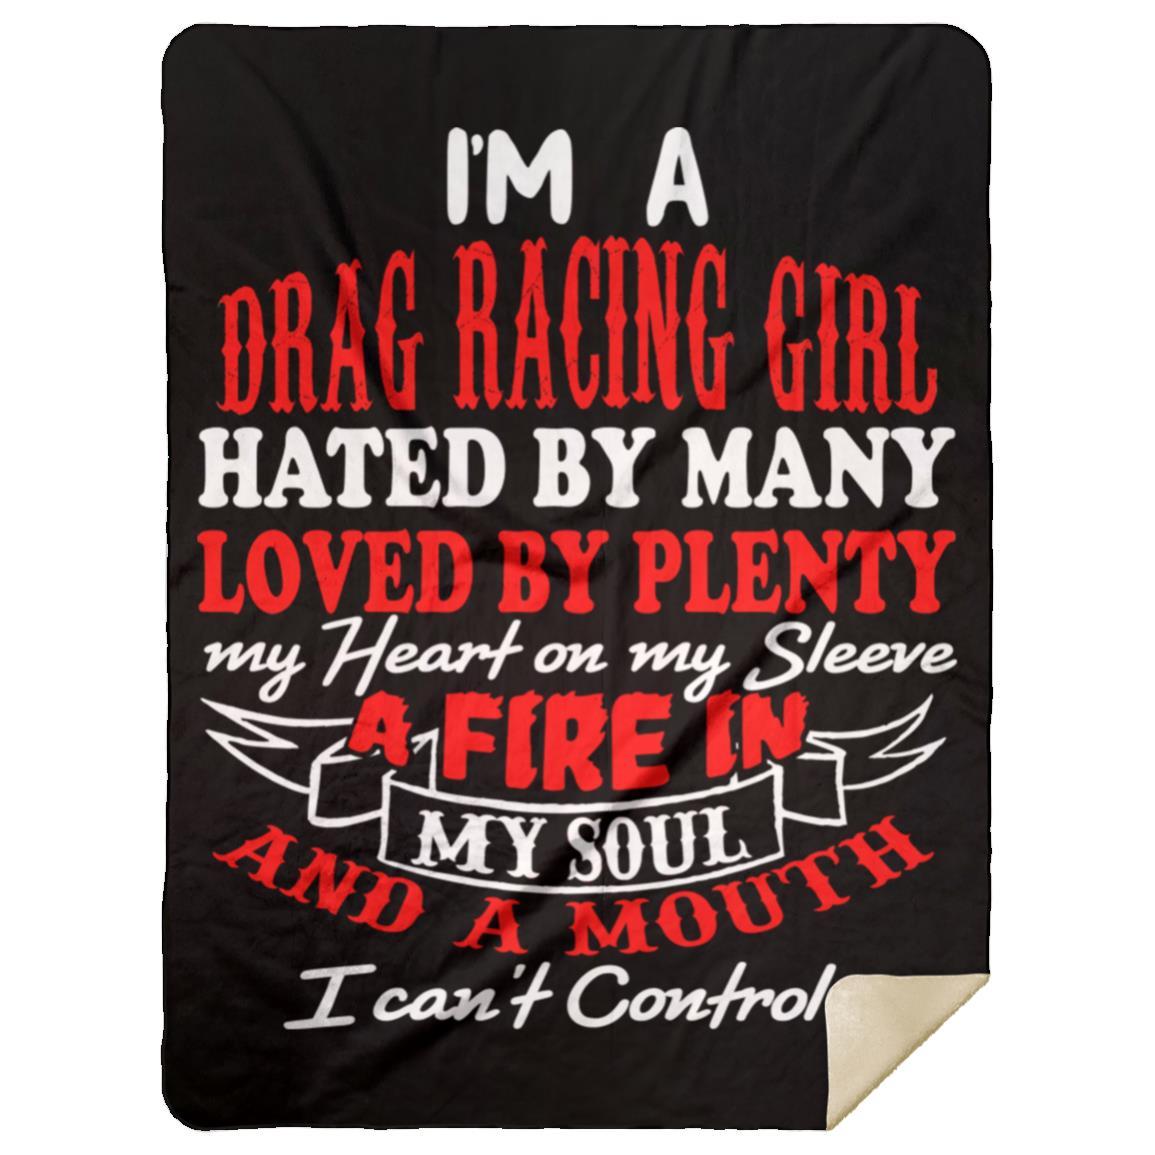 I'm A Drag Racing Girl Hated By Many Loved By Plenty Premium Mink Sherpa Blanket 60x80